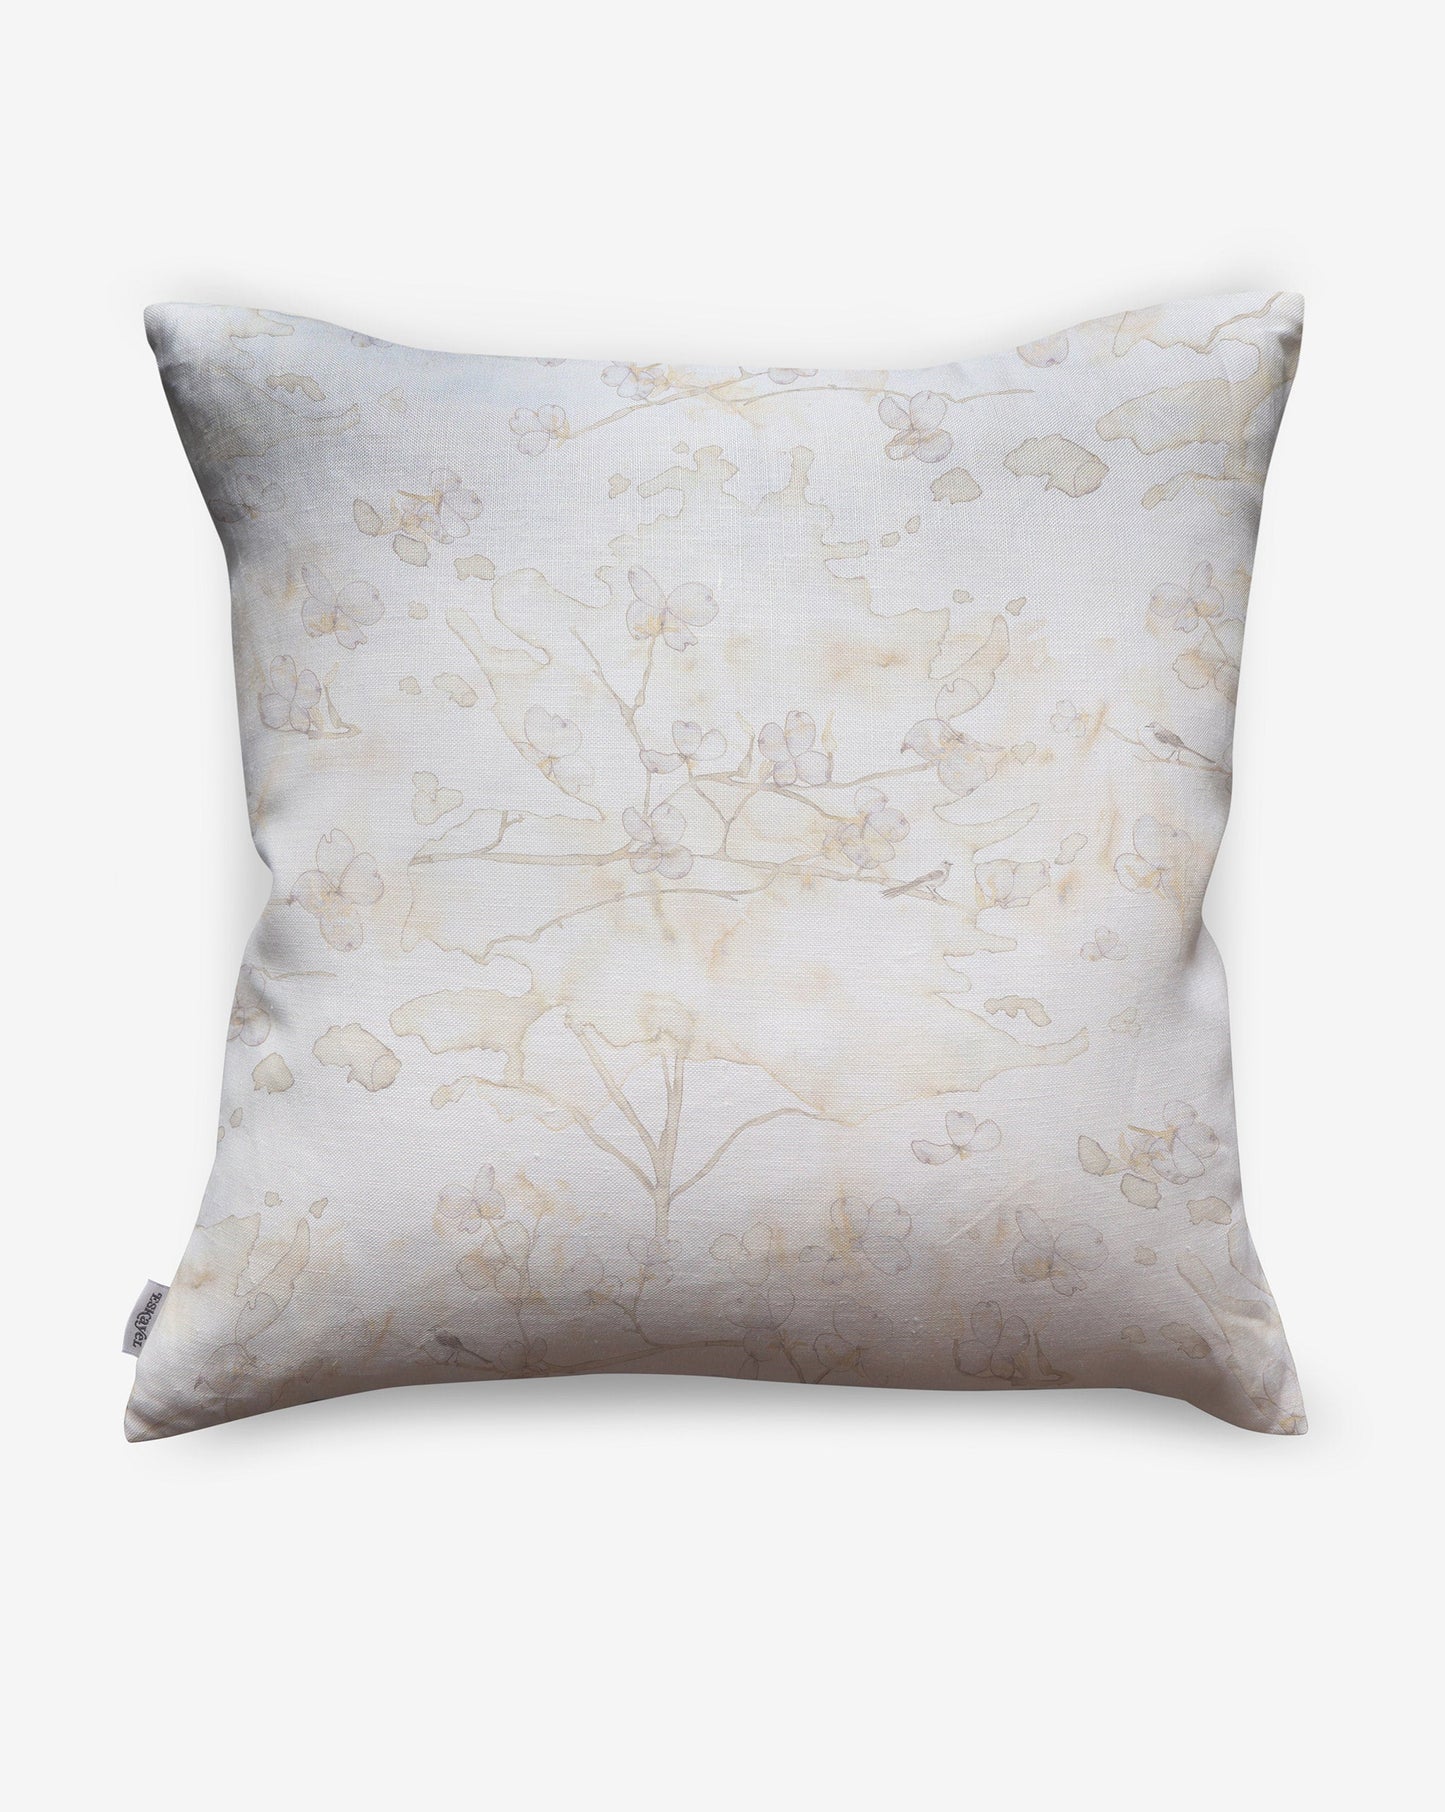 Inspired by spring on the East Coast, Dogwood Dreams pillows in Flax feature beige tones.